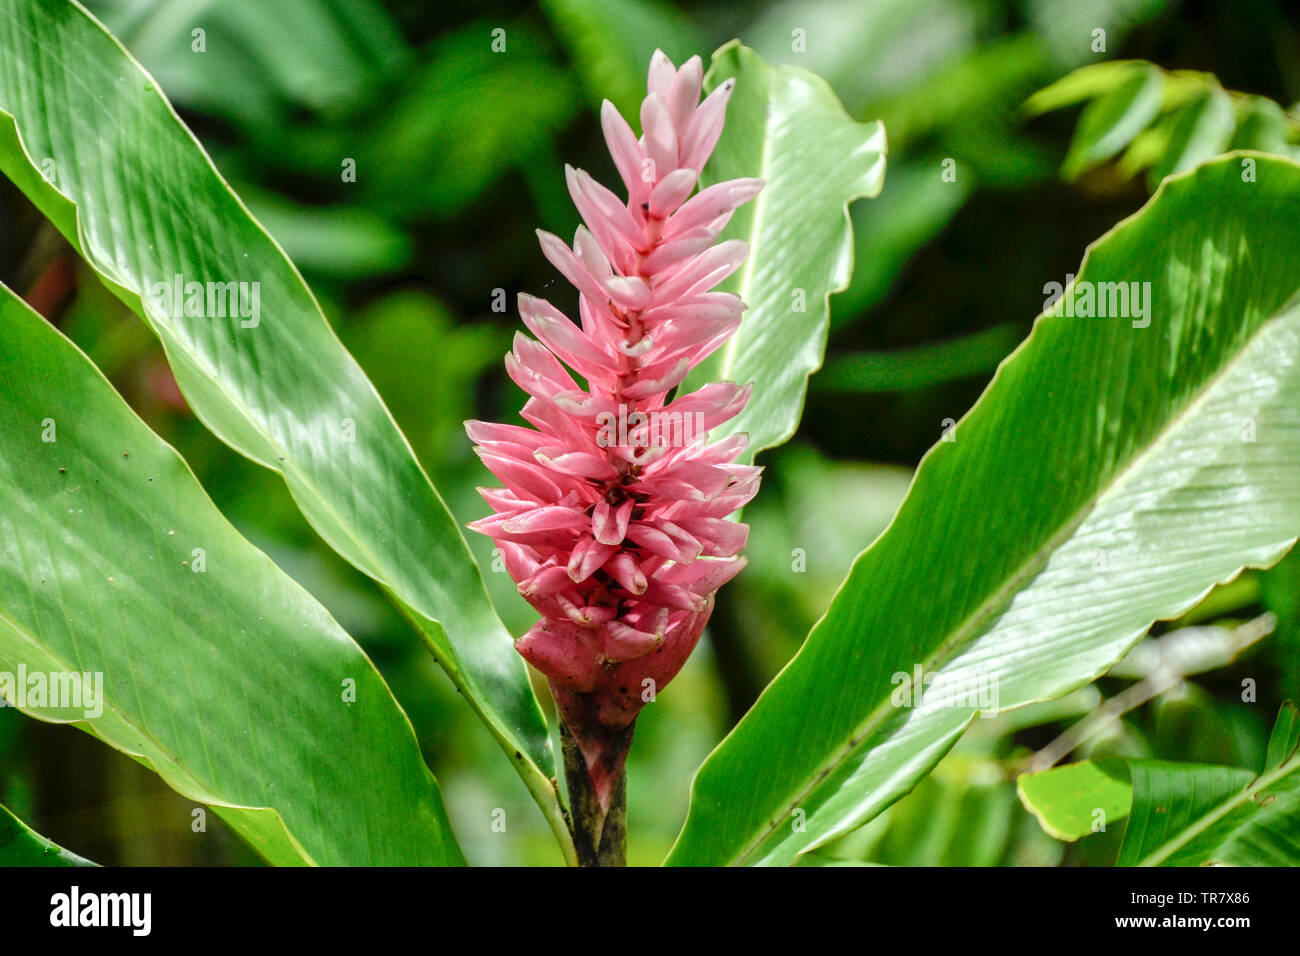 Alpinia purpurata is a species of the genus Alpinia in the ginger family. The photo was taken at the Guadeloupe Zoo in the Caribbean. Stock Photo